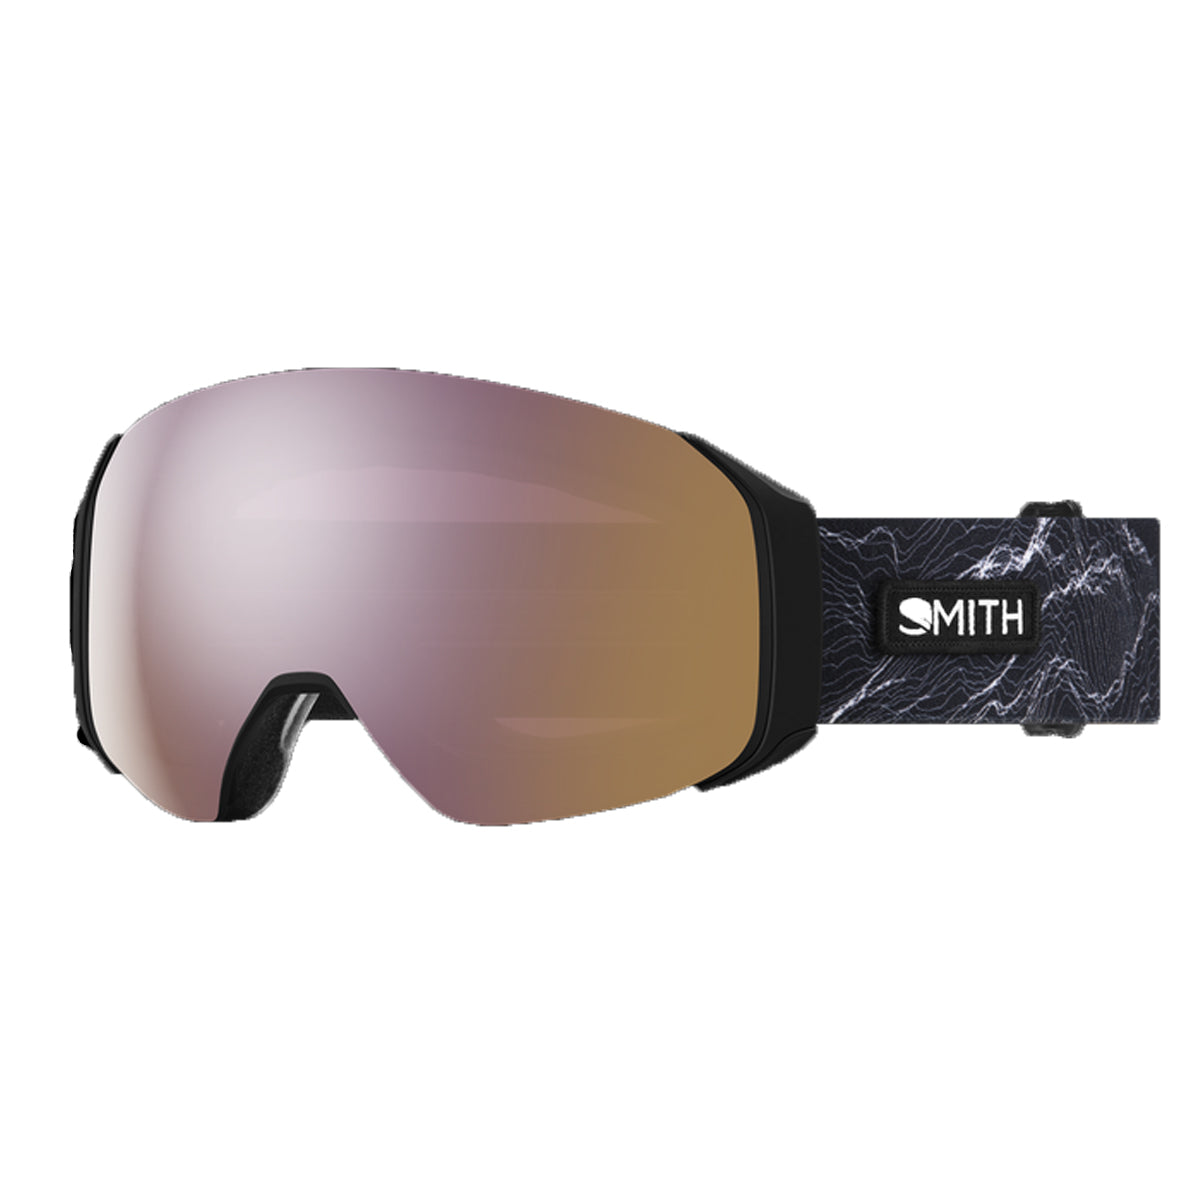 SMITH 4D MAG S SNOWBOARD GOGGLES - LOW BRIDGE FIT